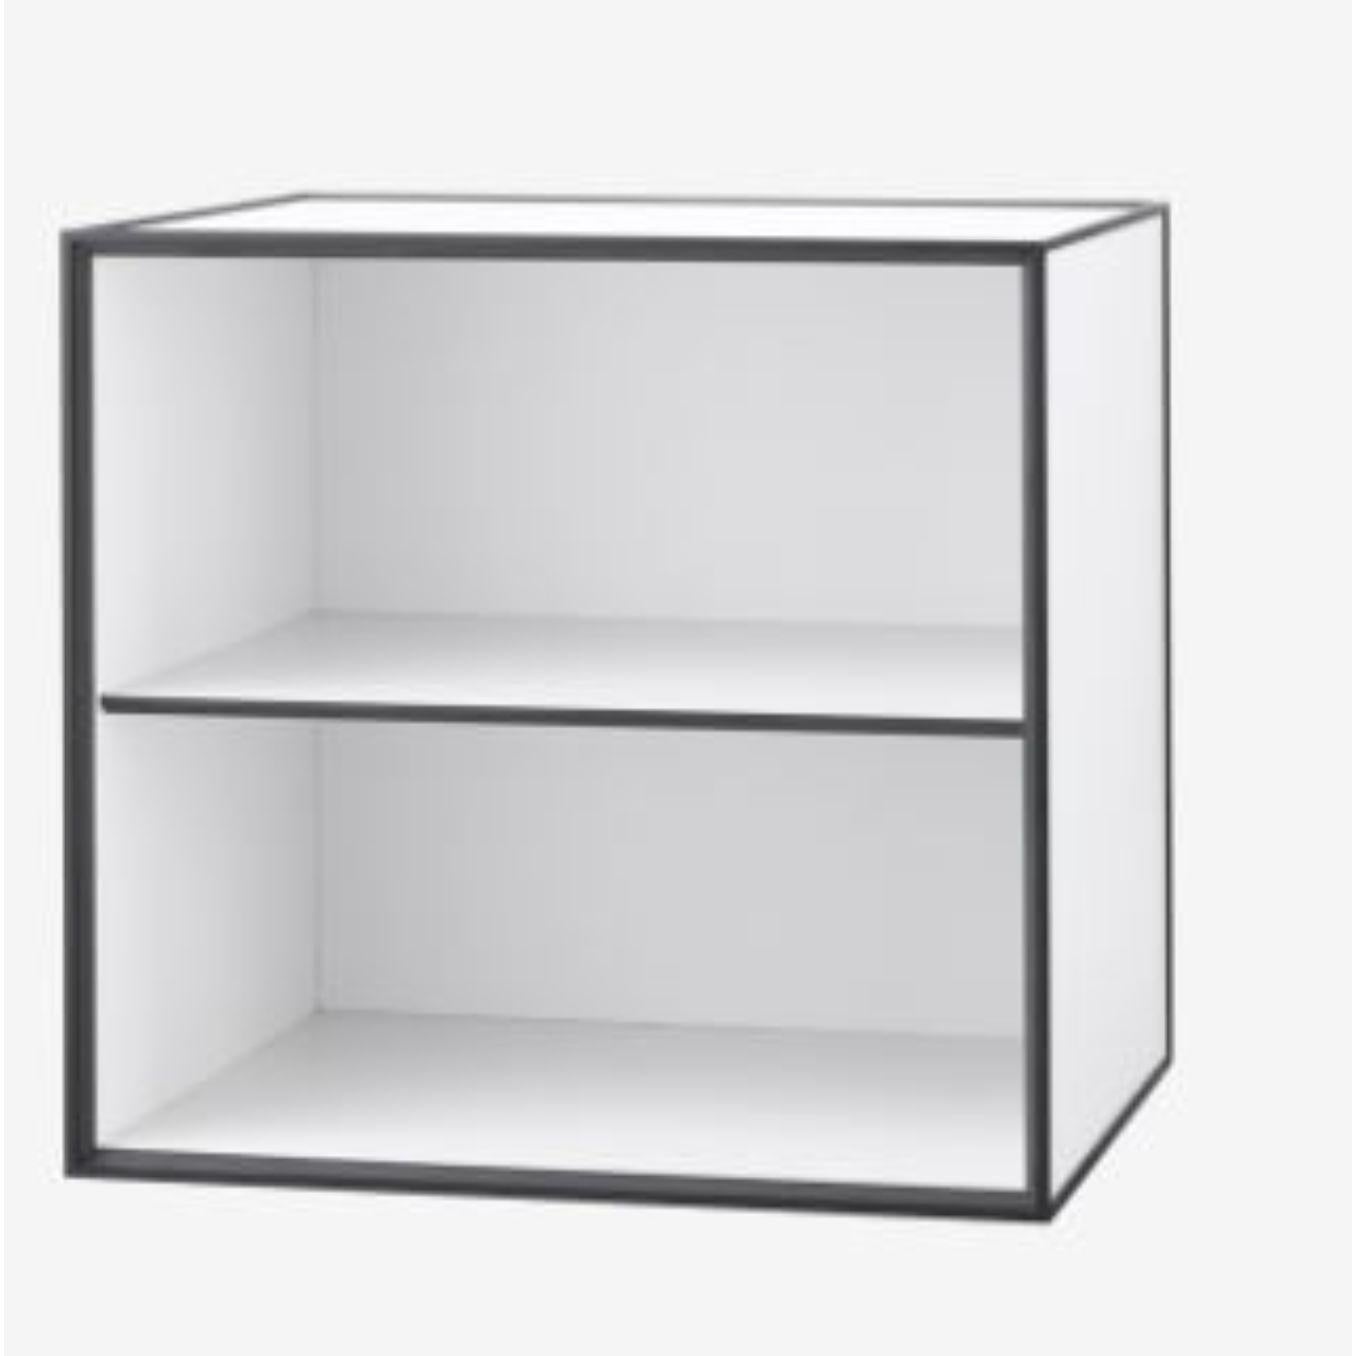 Contemporary 49 Sand Frame Box with Shelf by Lassen For Sale